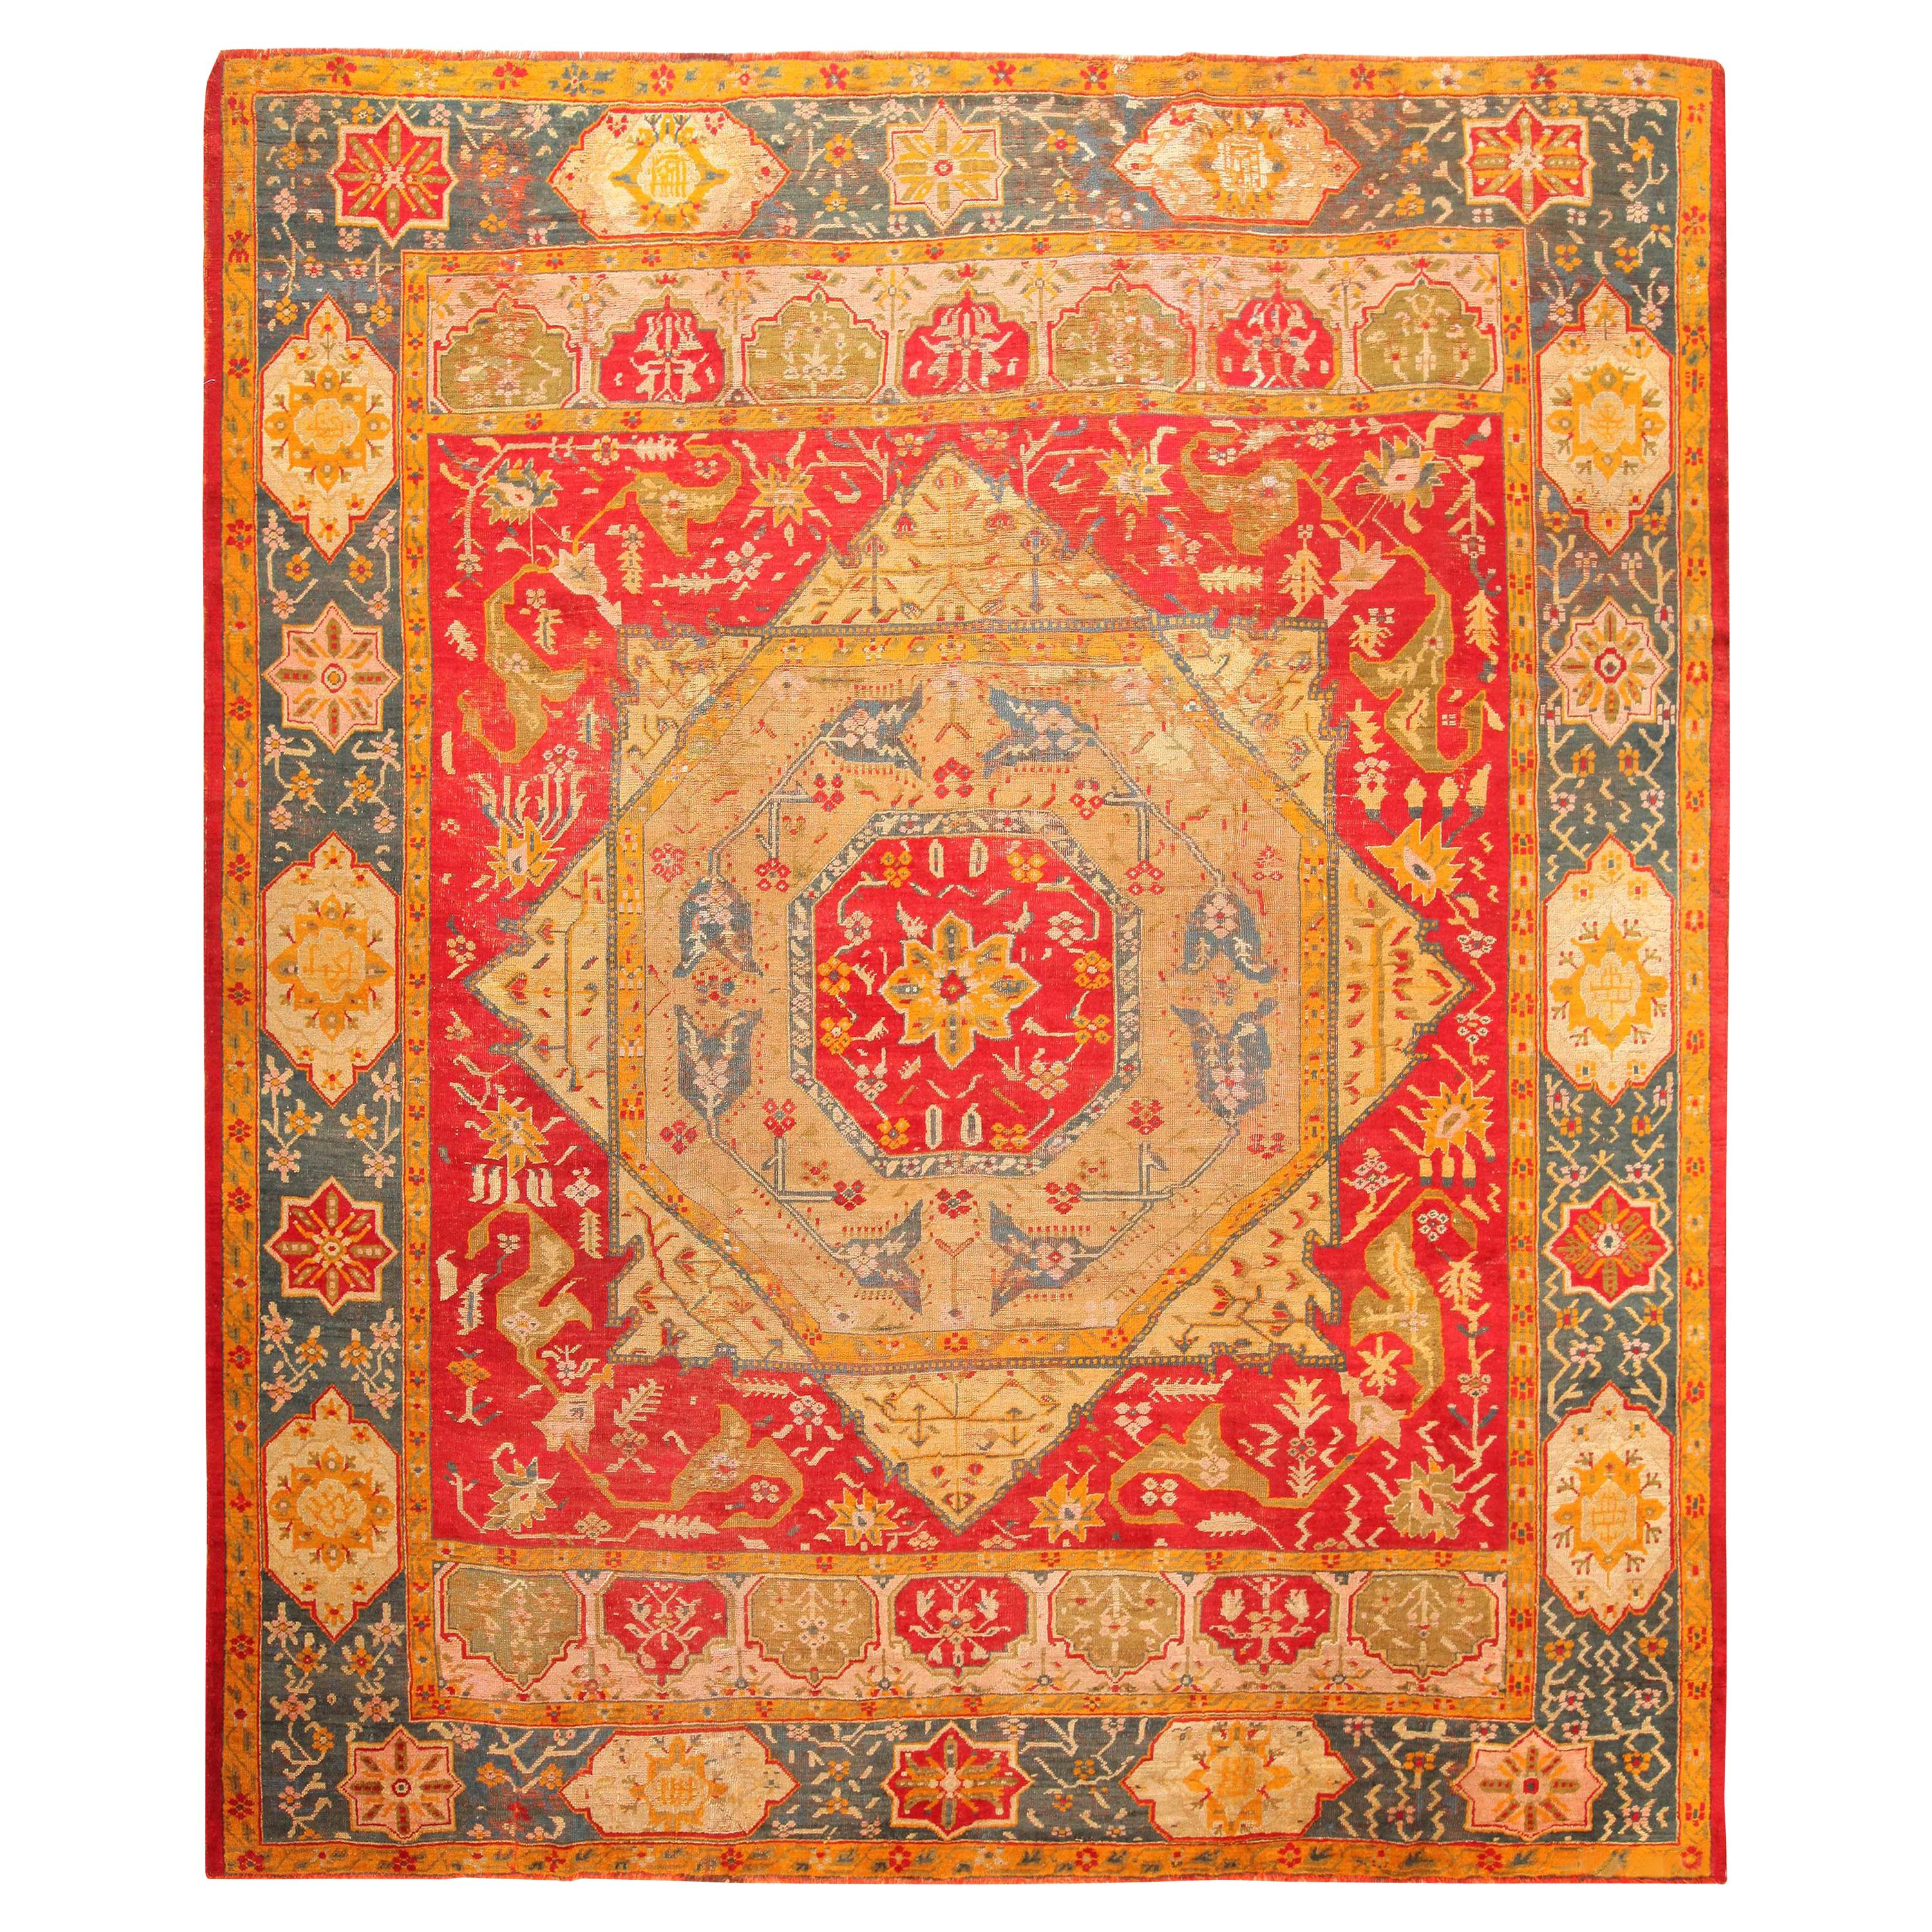 Nazmiyal Collection Antique Turkish Oushak Rug. Size: 12 ft x 14 ft 3 in